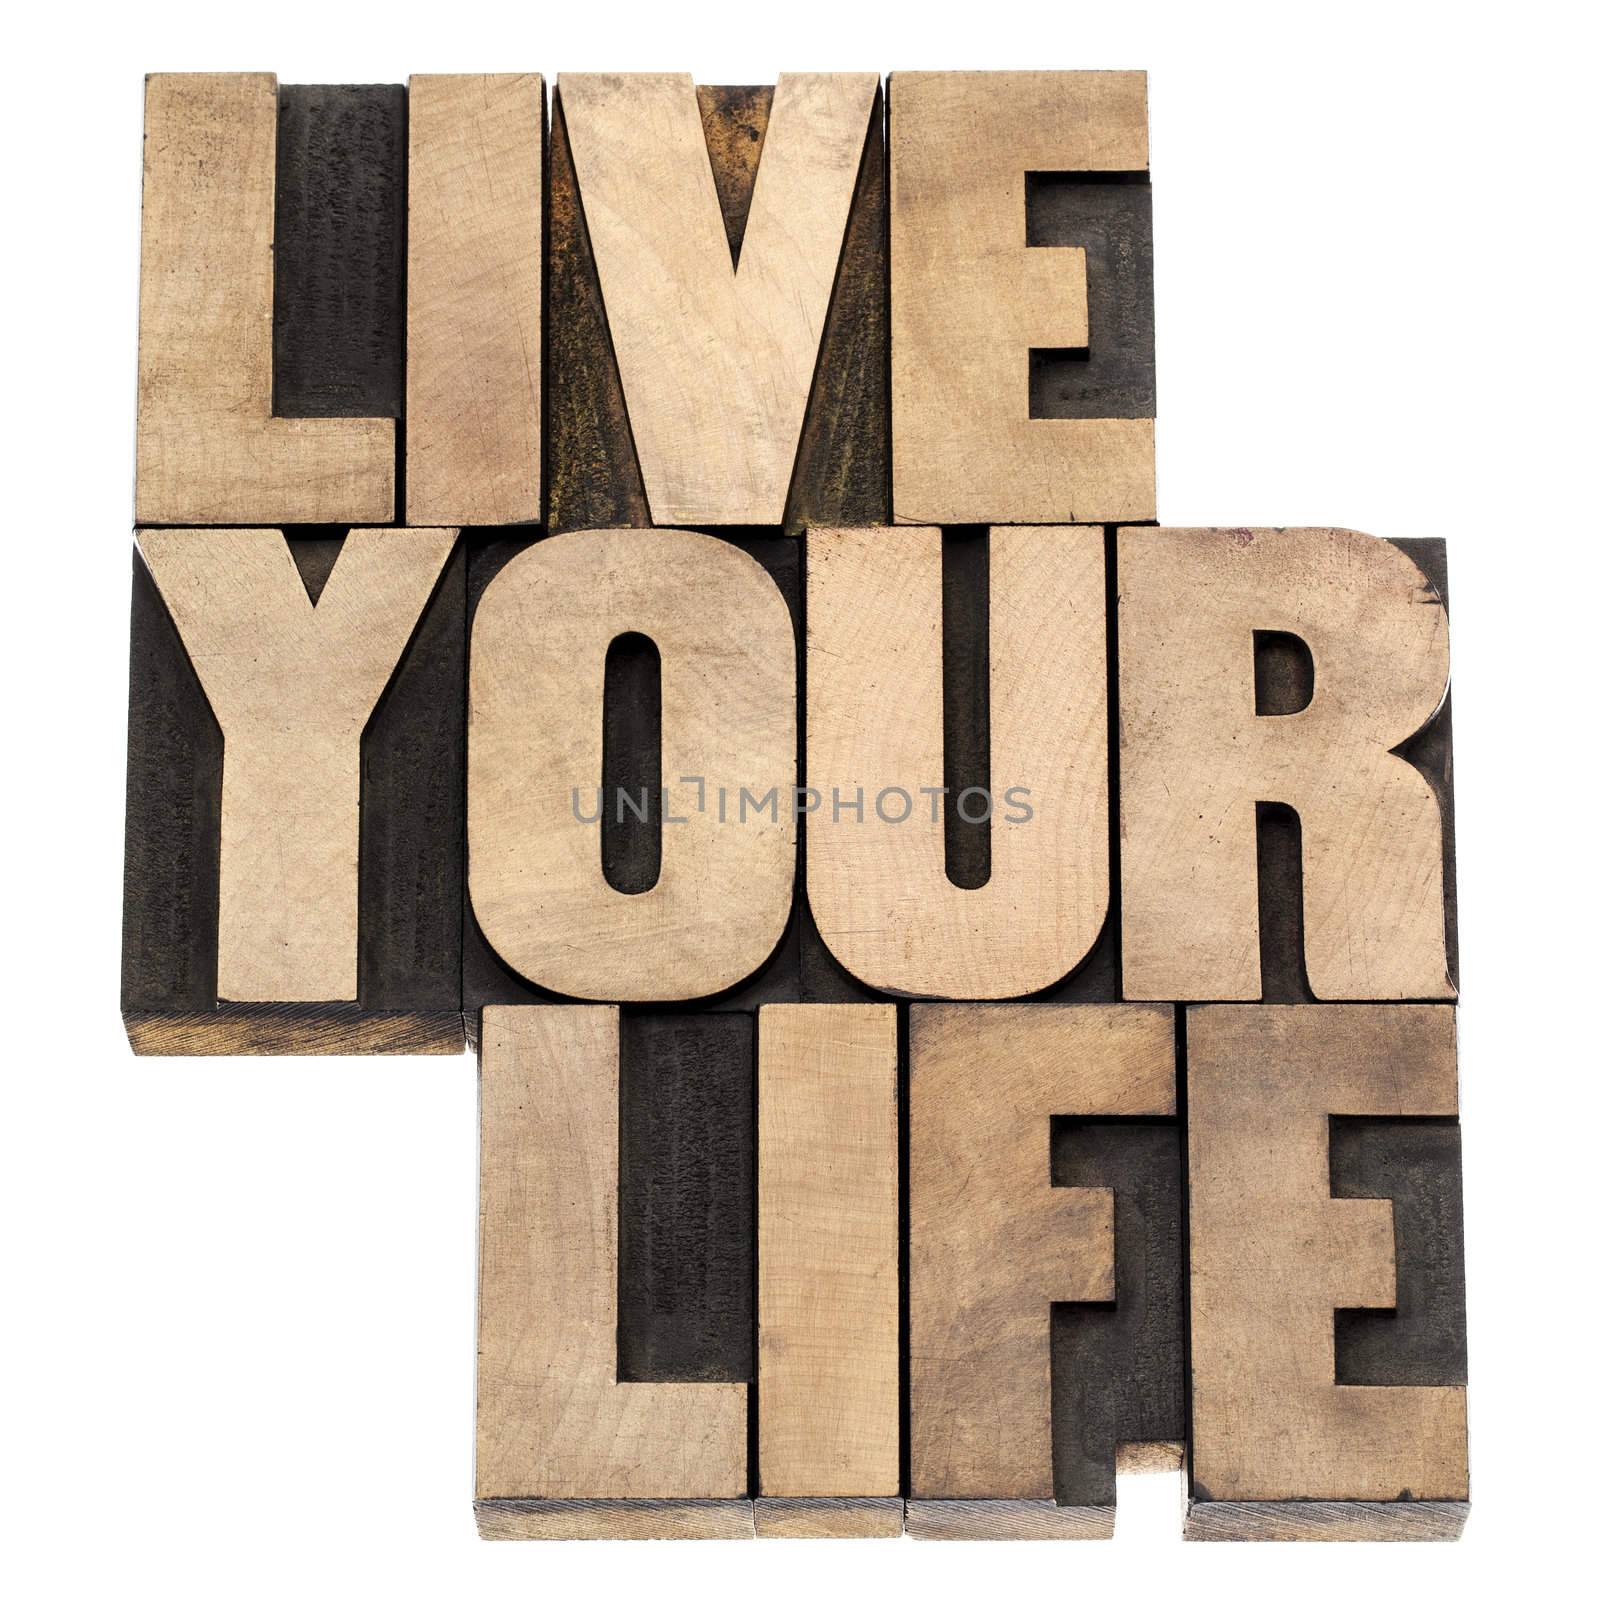 live your life phrase - isolated text in vintage letterpress wood type printing blocks